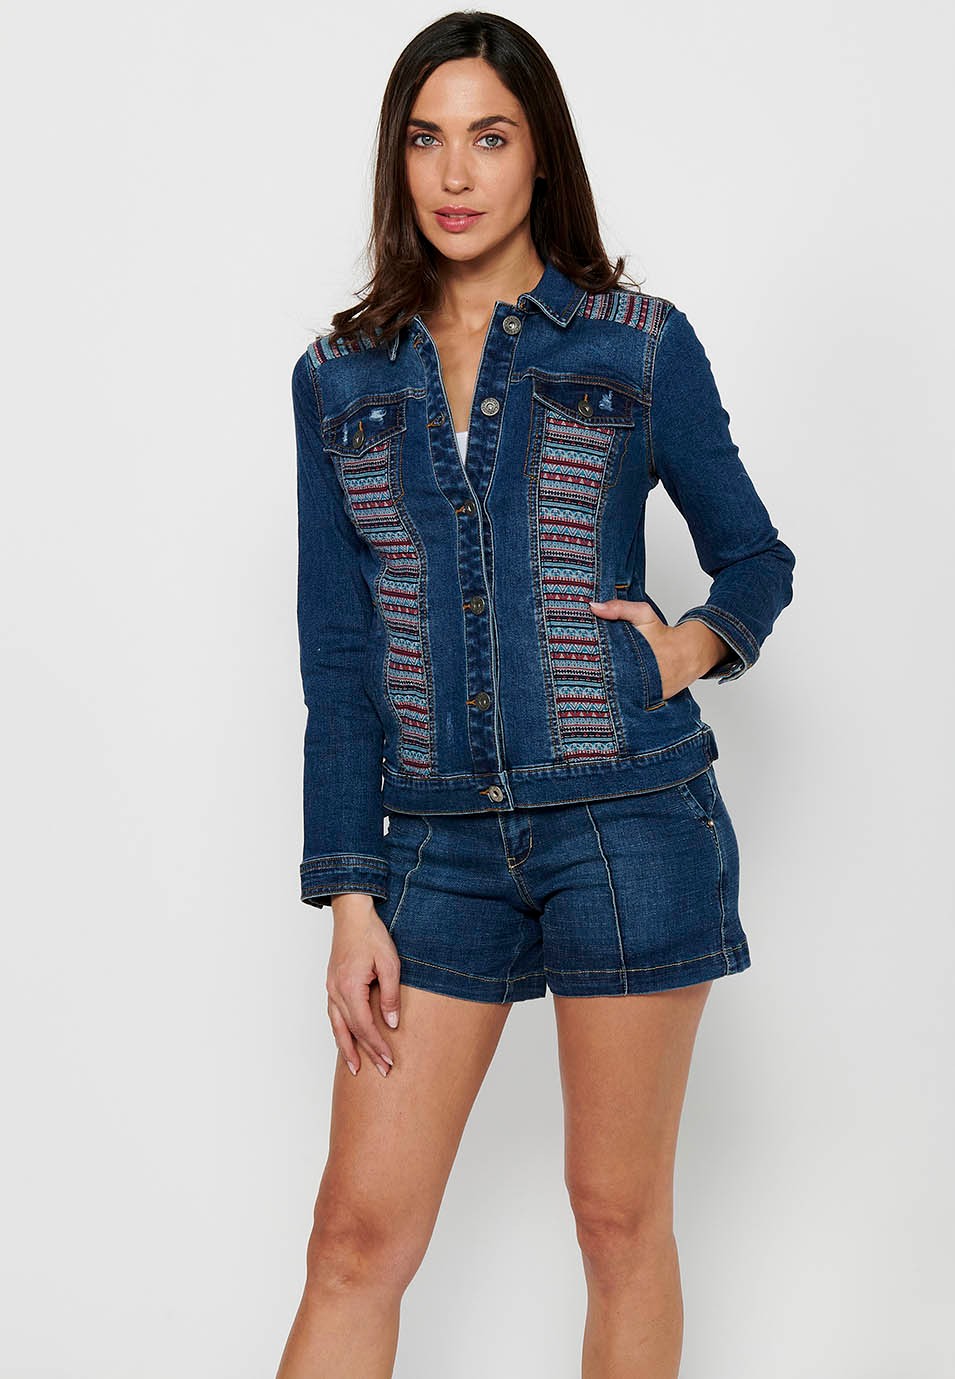 Long-sleeved denim jacket with ethnic fabric detail and front closure with blue buttons for women 6